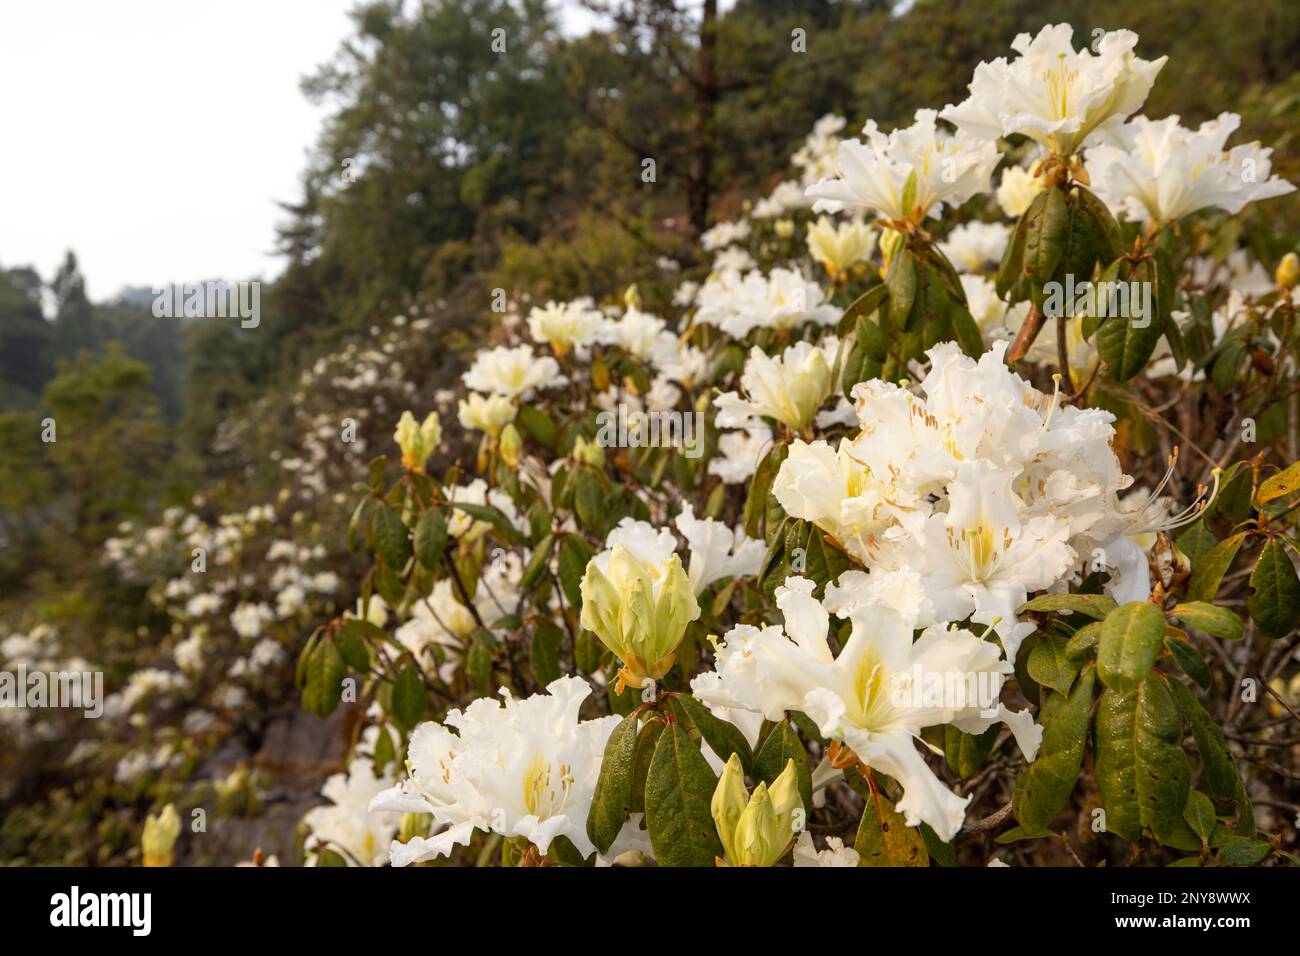 The landscape of white Rhododendron flowers in full bloom on a winter morning, rhododendron forest in the Himalayas Mountain Range. Selective focus. Stock Photo